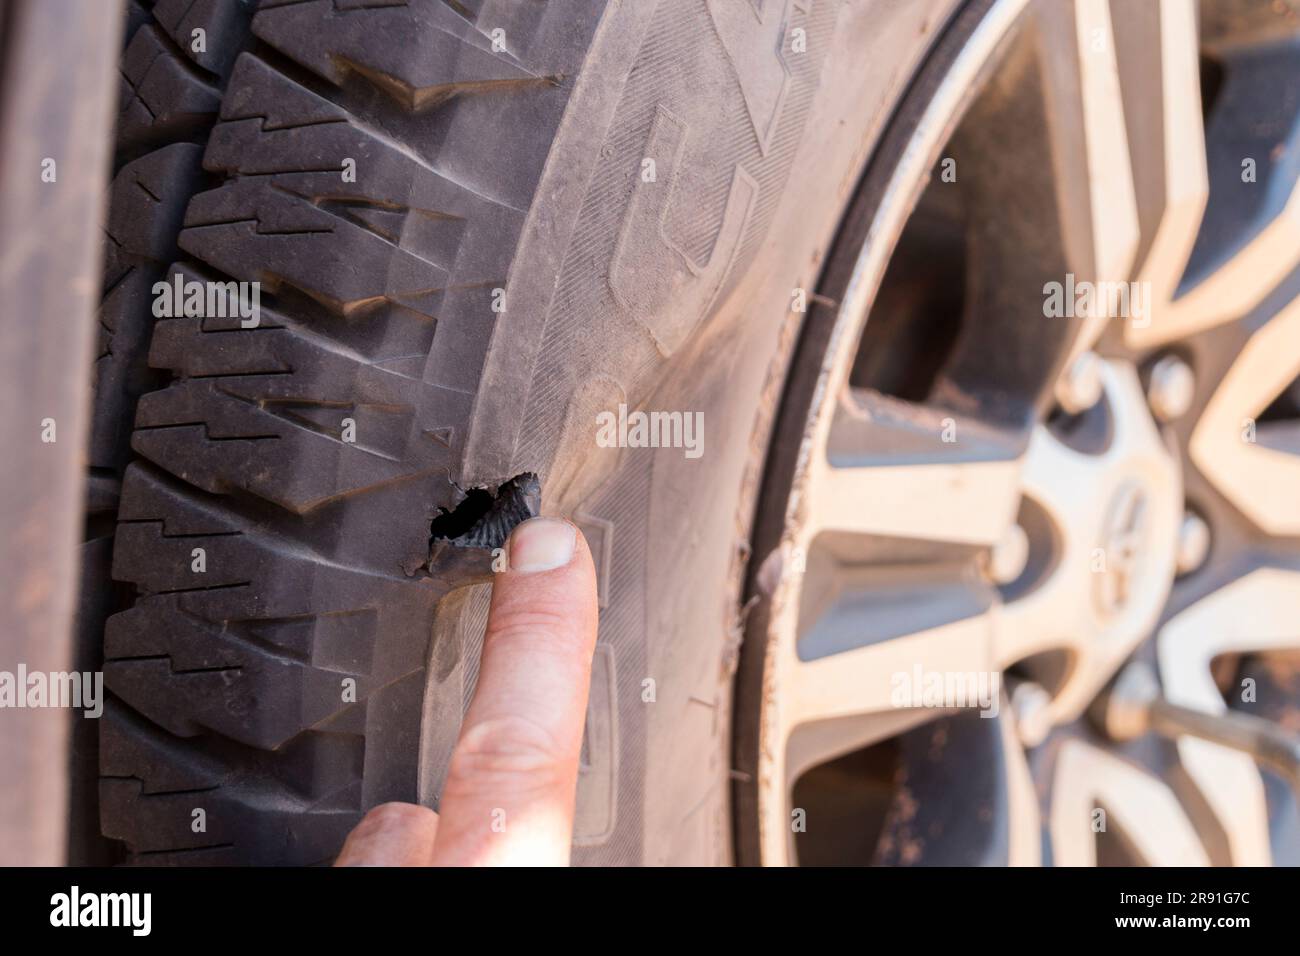 A hand shows a large hole in a car tyre on the rough dirt roads of Western Australia Stock Photo